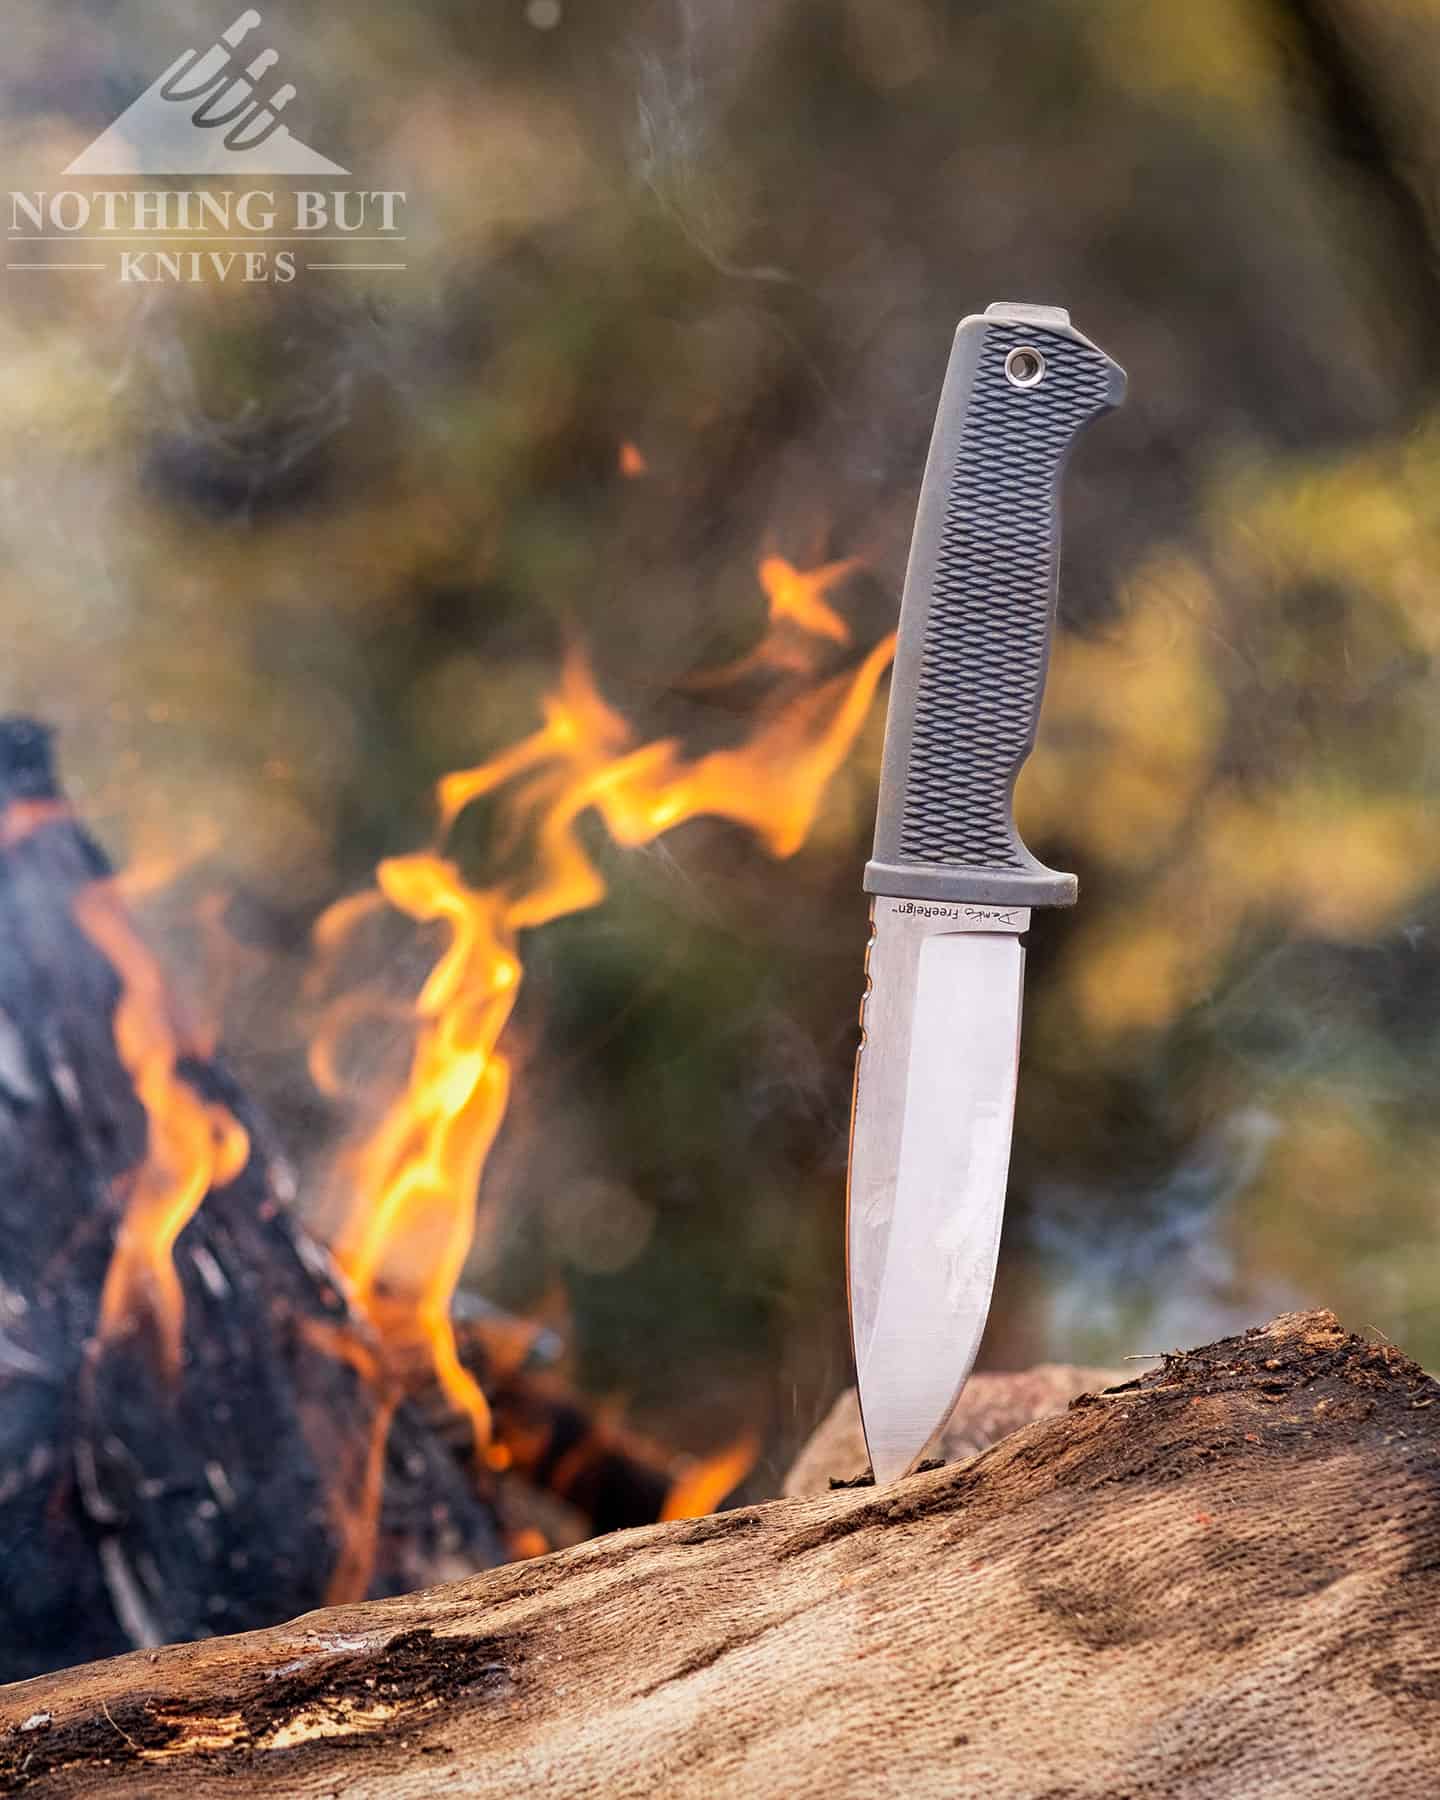 The Demko Freereign is a fixed blade based on the Demko designed Cold Steel AD15 pocket knife. 